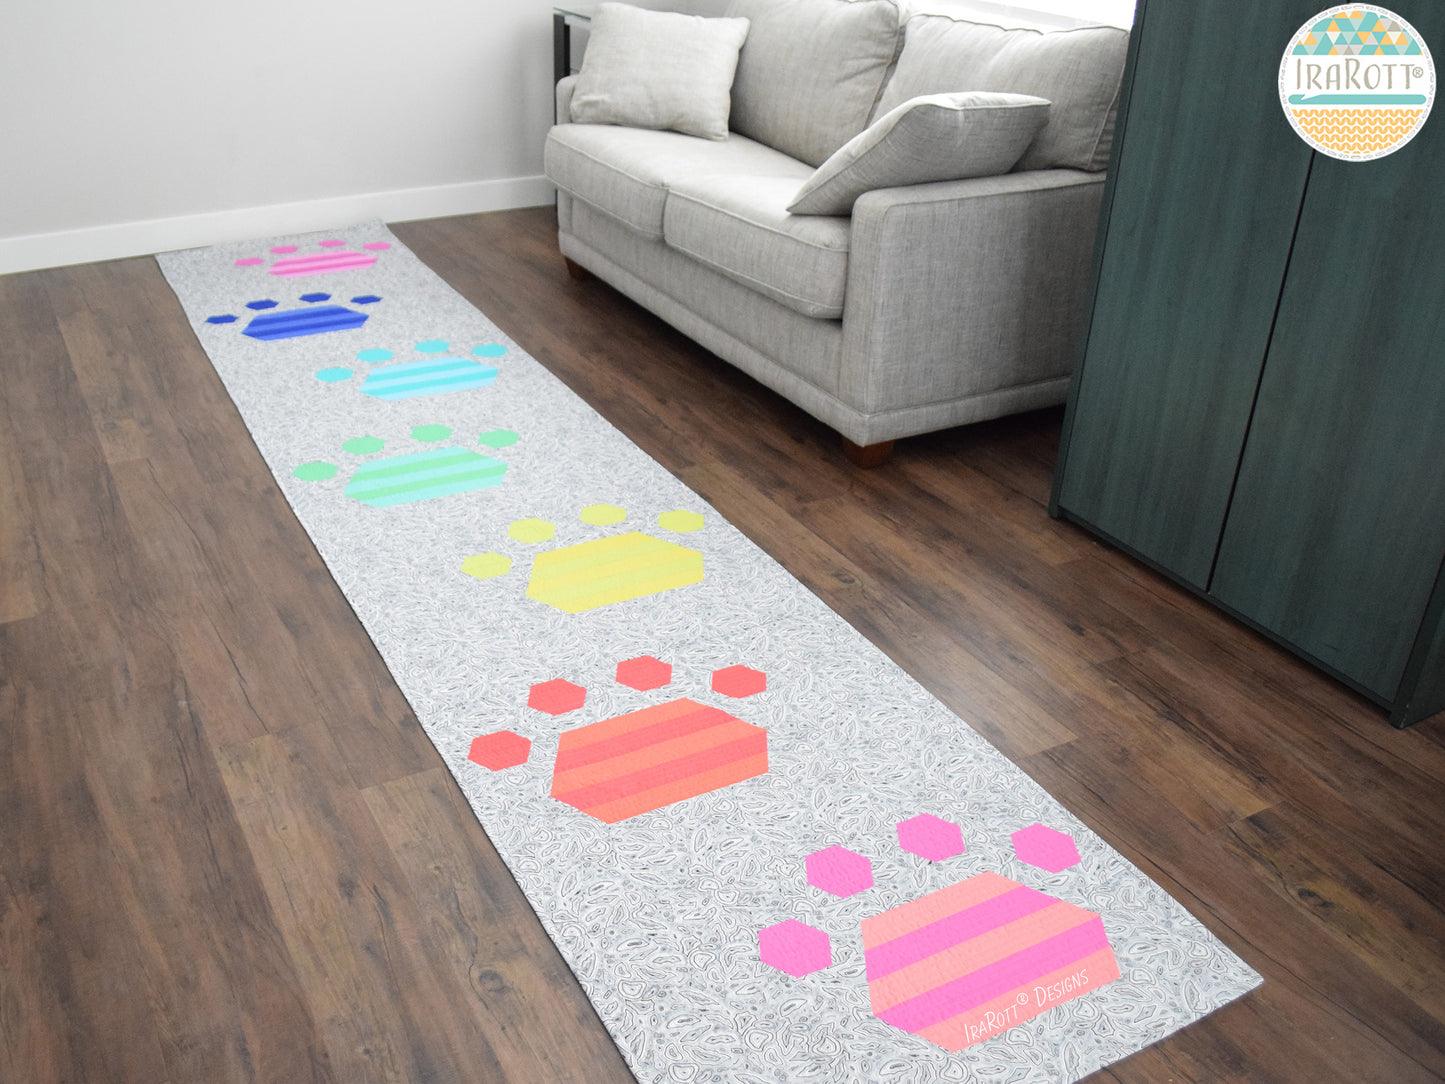 The Pawesome Floor Runner Jelly Roll Rug Quilting Pattern